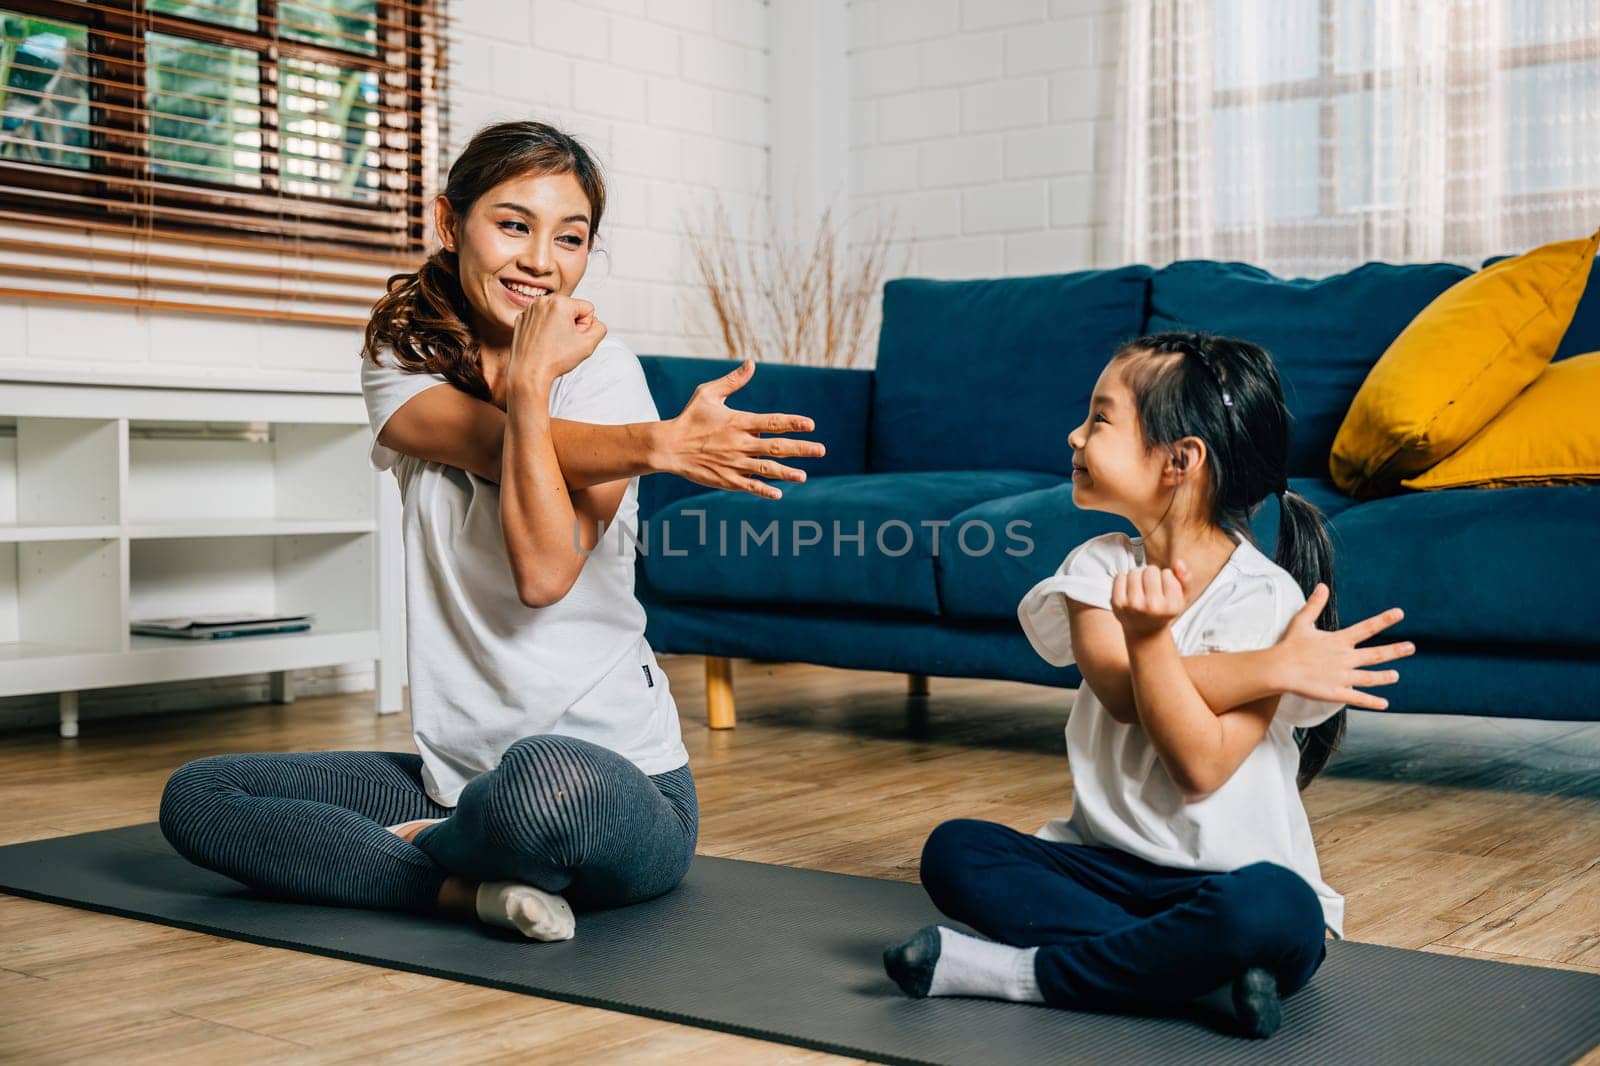 In the gym center a mother supports her daughter in stretching and yoga exercises by Sorapop